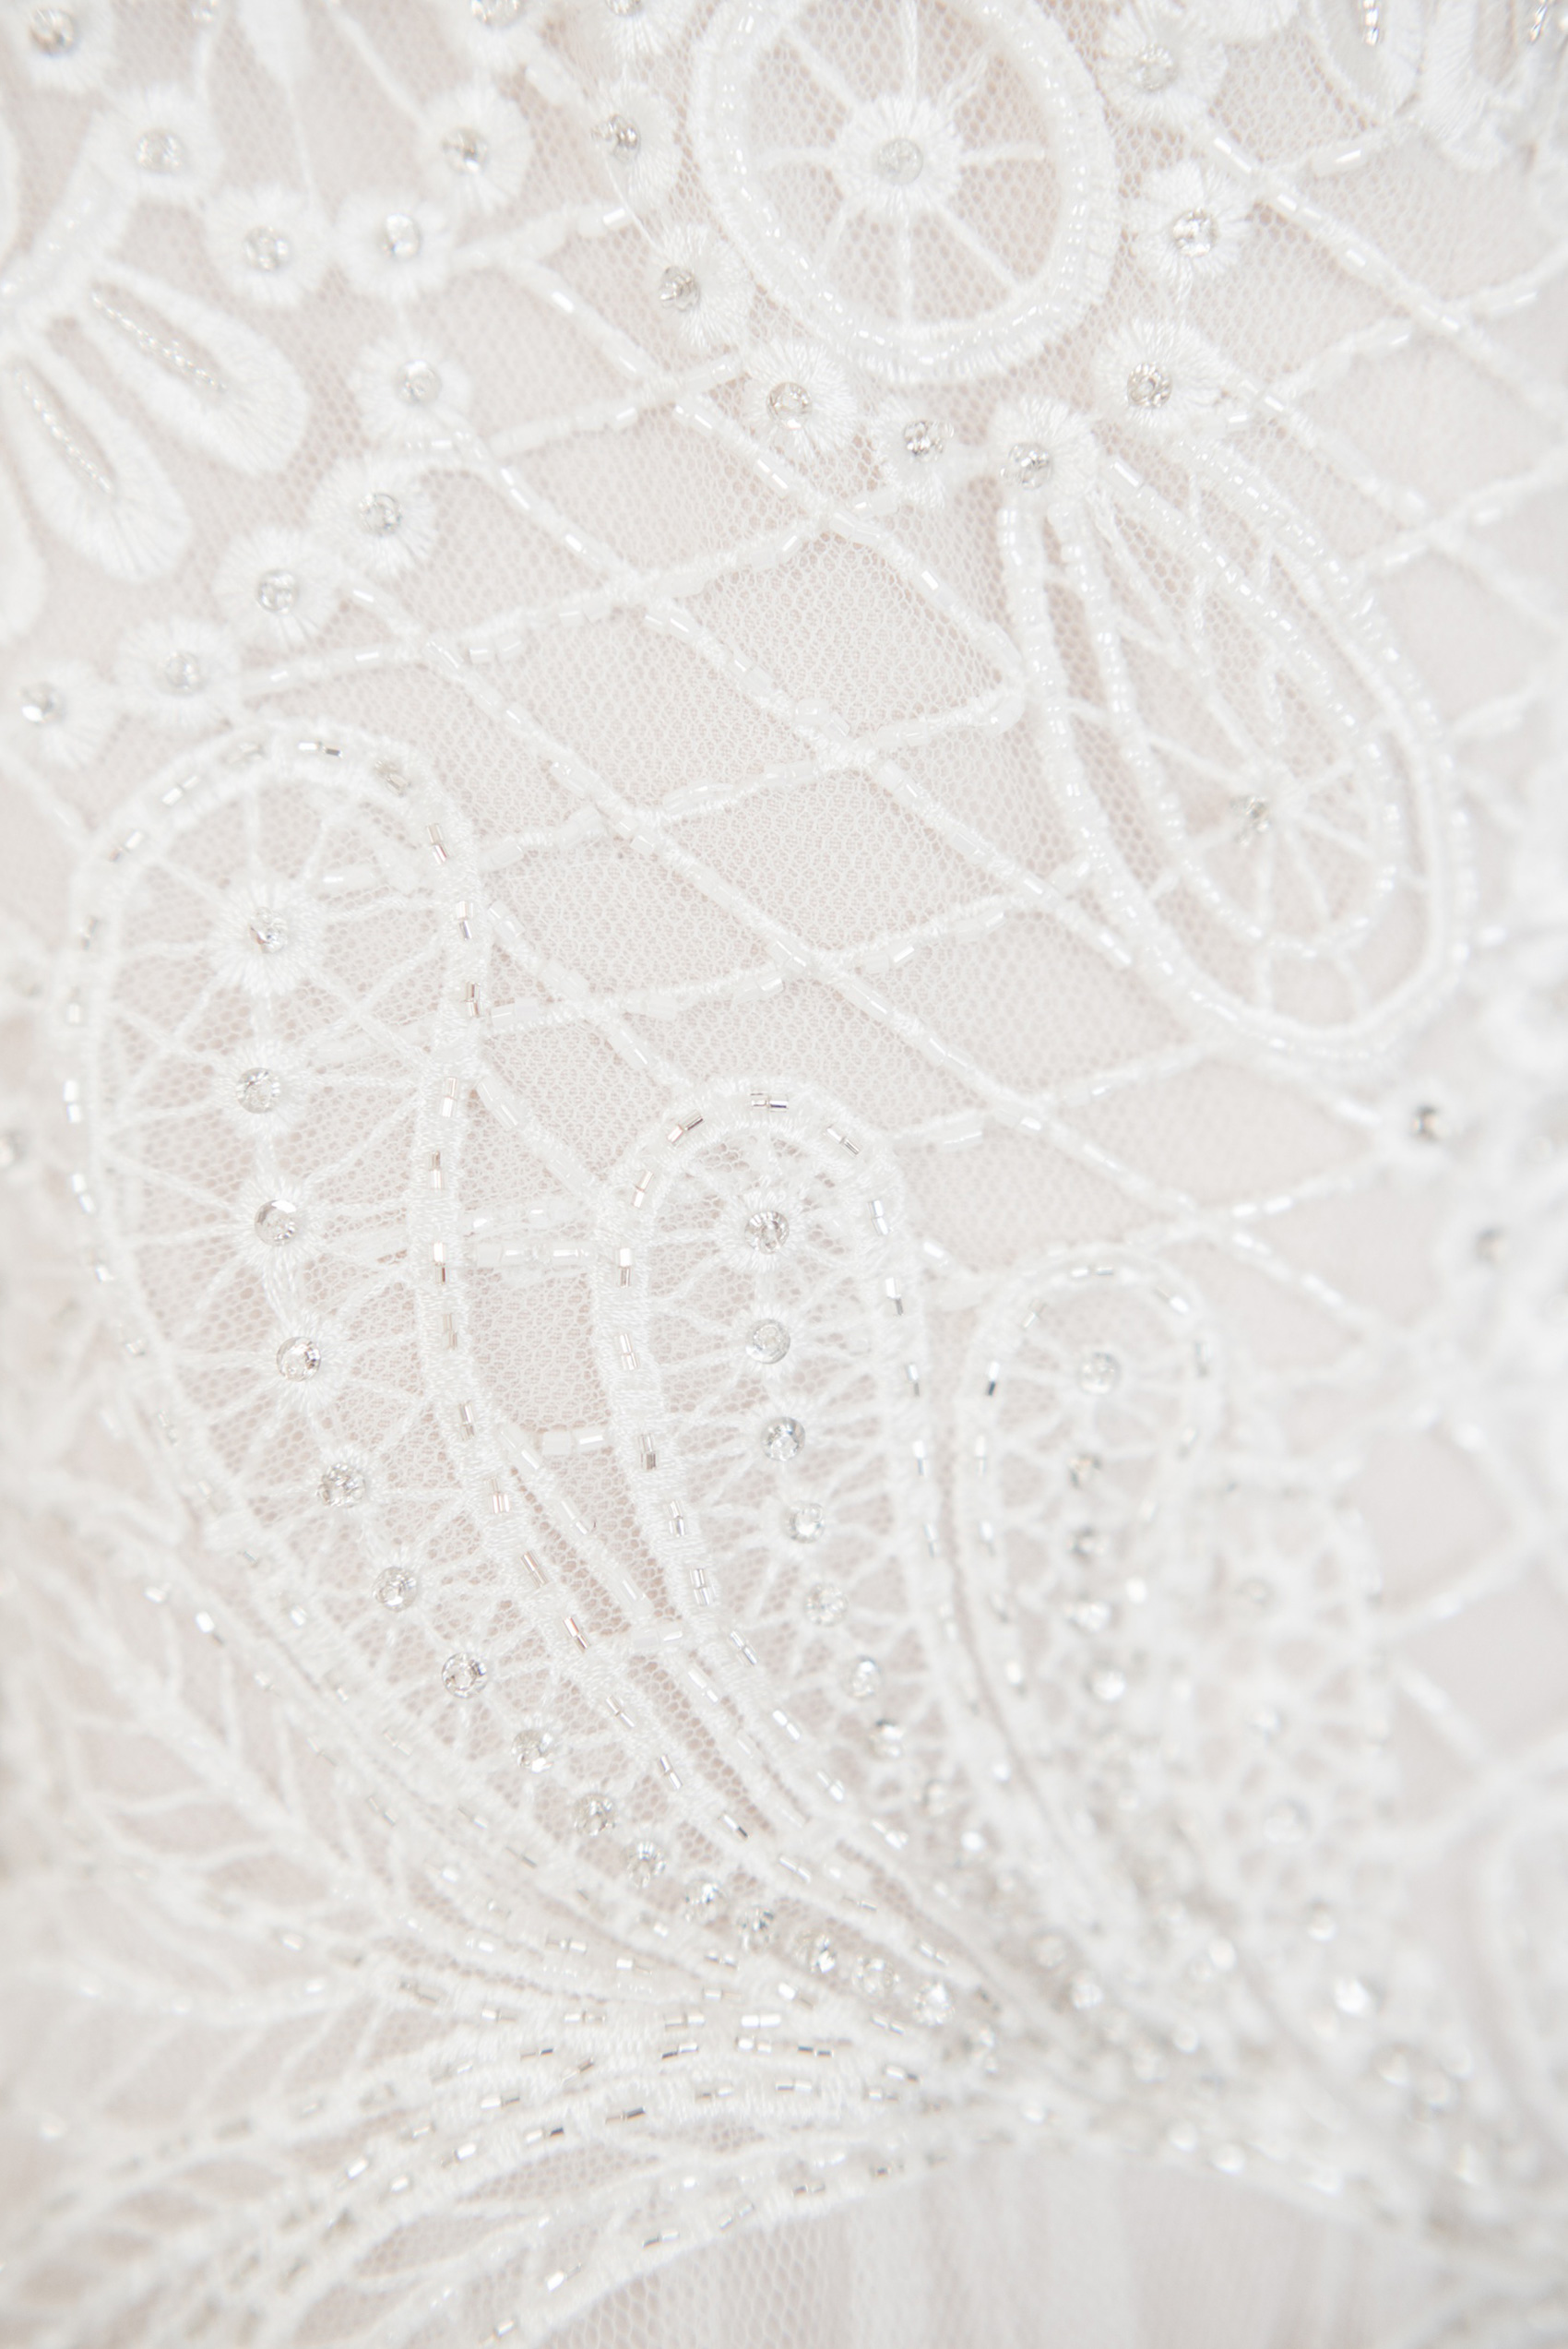 Mikkel Paige Photography photos from a wedding at Grand Paraiso, Mexico, Playa del Carmen Iberostar resort. Detail picture of the bride's lace detail on her gown.